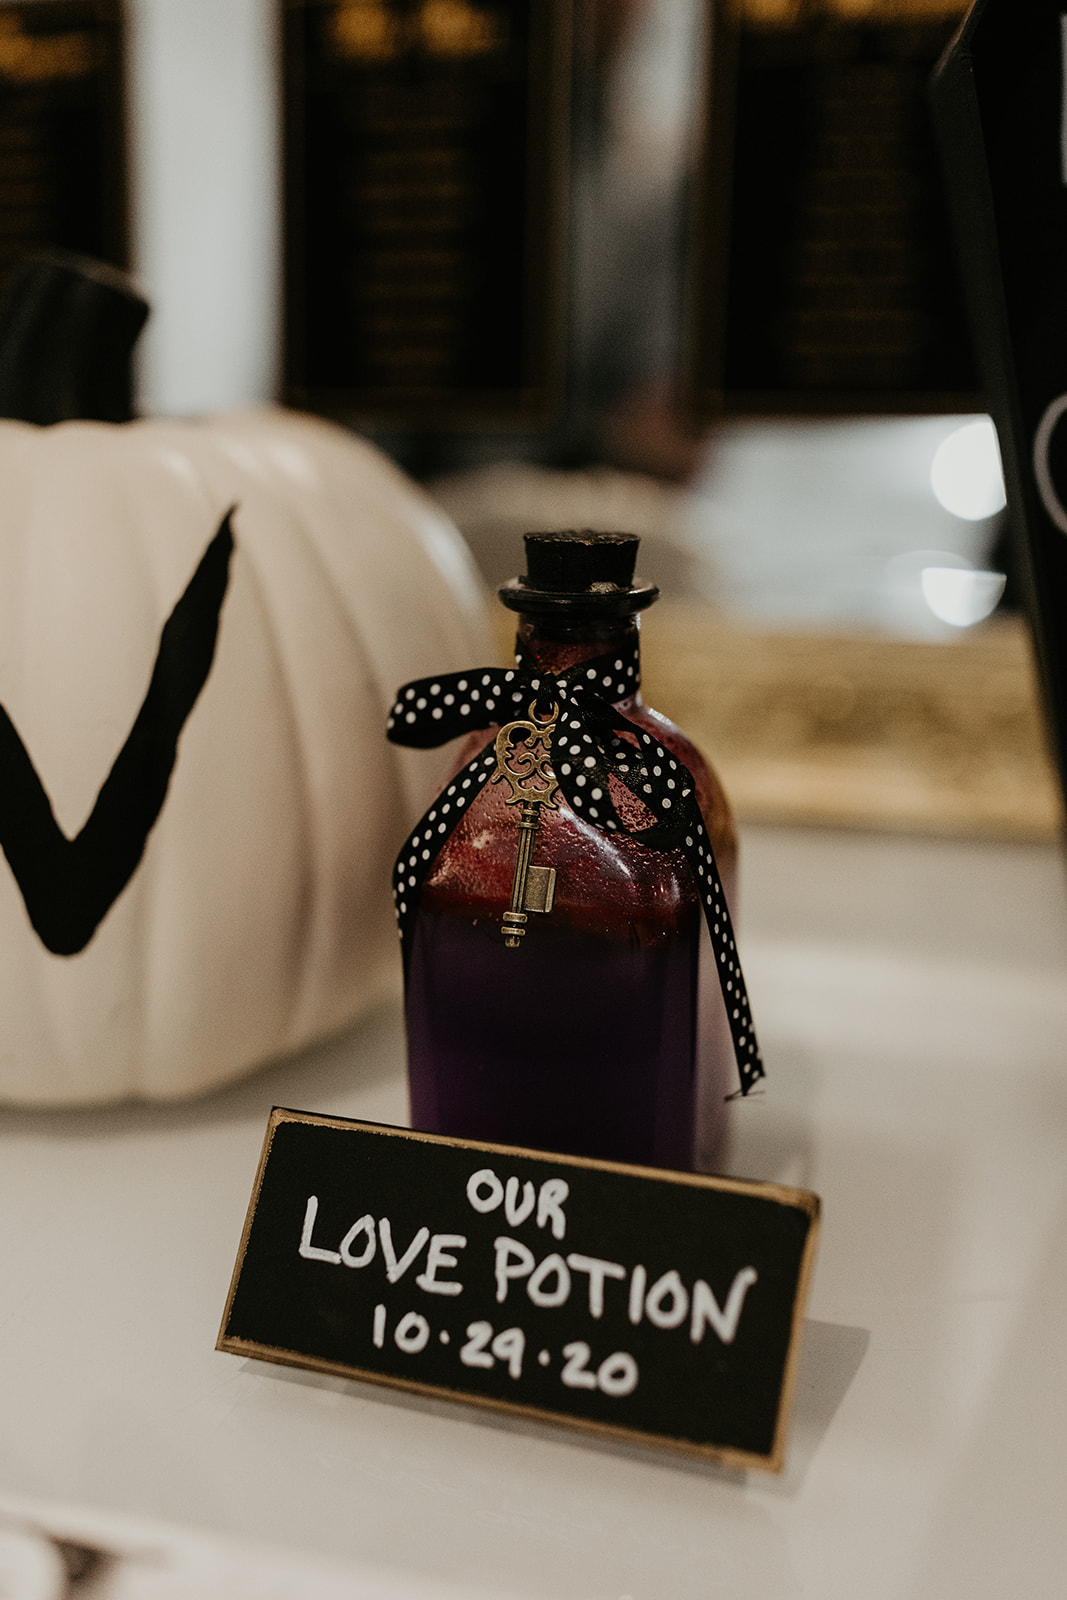 spooky decorations "our love potion"